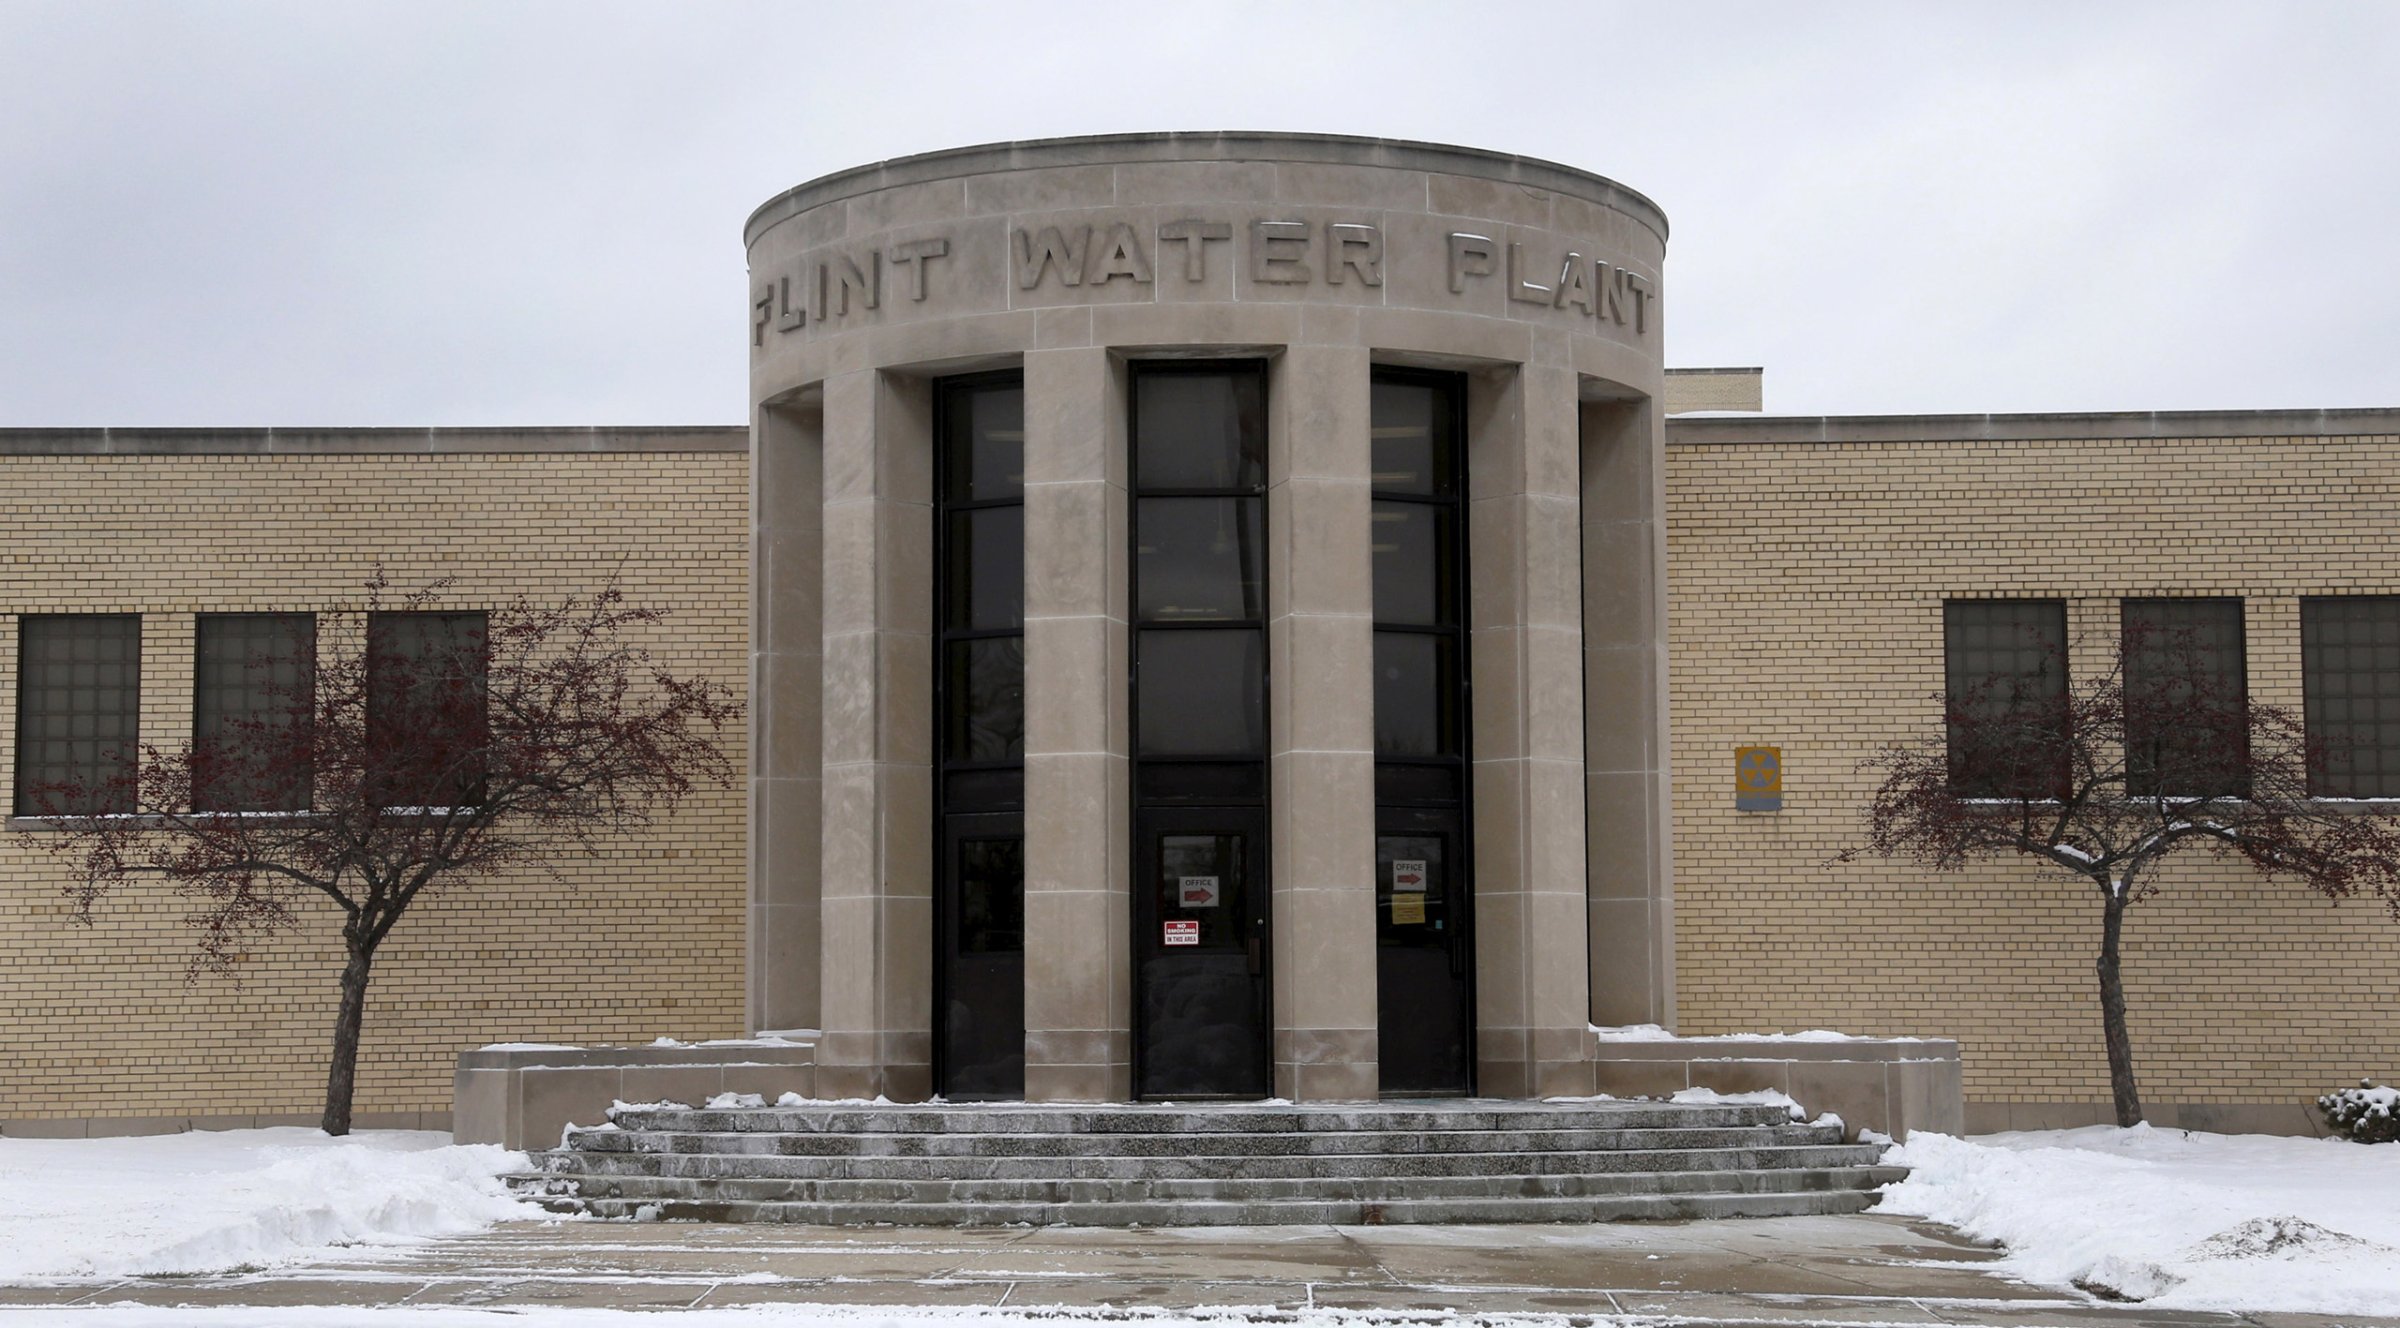 The front of the Flint Water Plant is seen in Flint, Michigan January 13, 2016. The Federal Bureau of Investigation said on Tuesday it was joining a criminal investigation of lead-contaminated drinking water in Flint, Michigan, exploring whether laws were broken in a crisis that has captured international attention. Picture taken January 13, 2016. REUTERS/Rebecca Cook TPX IMAGES OF THE DAY - RTX25ADC